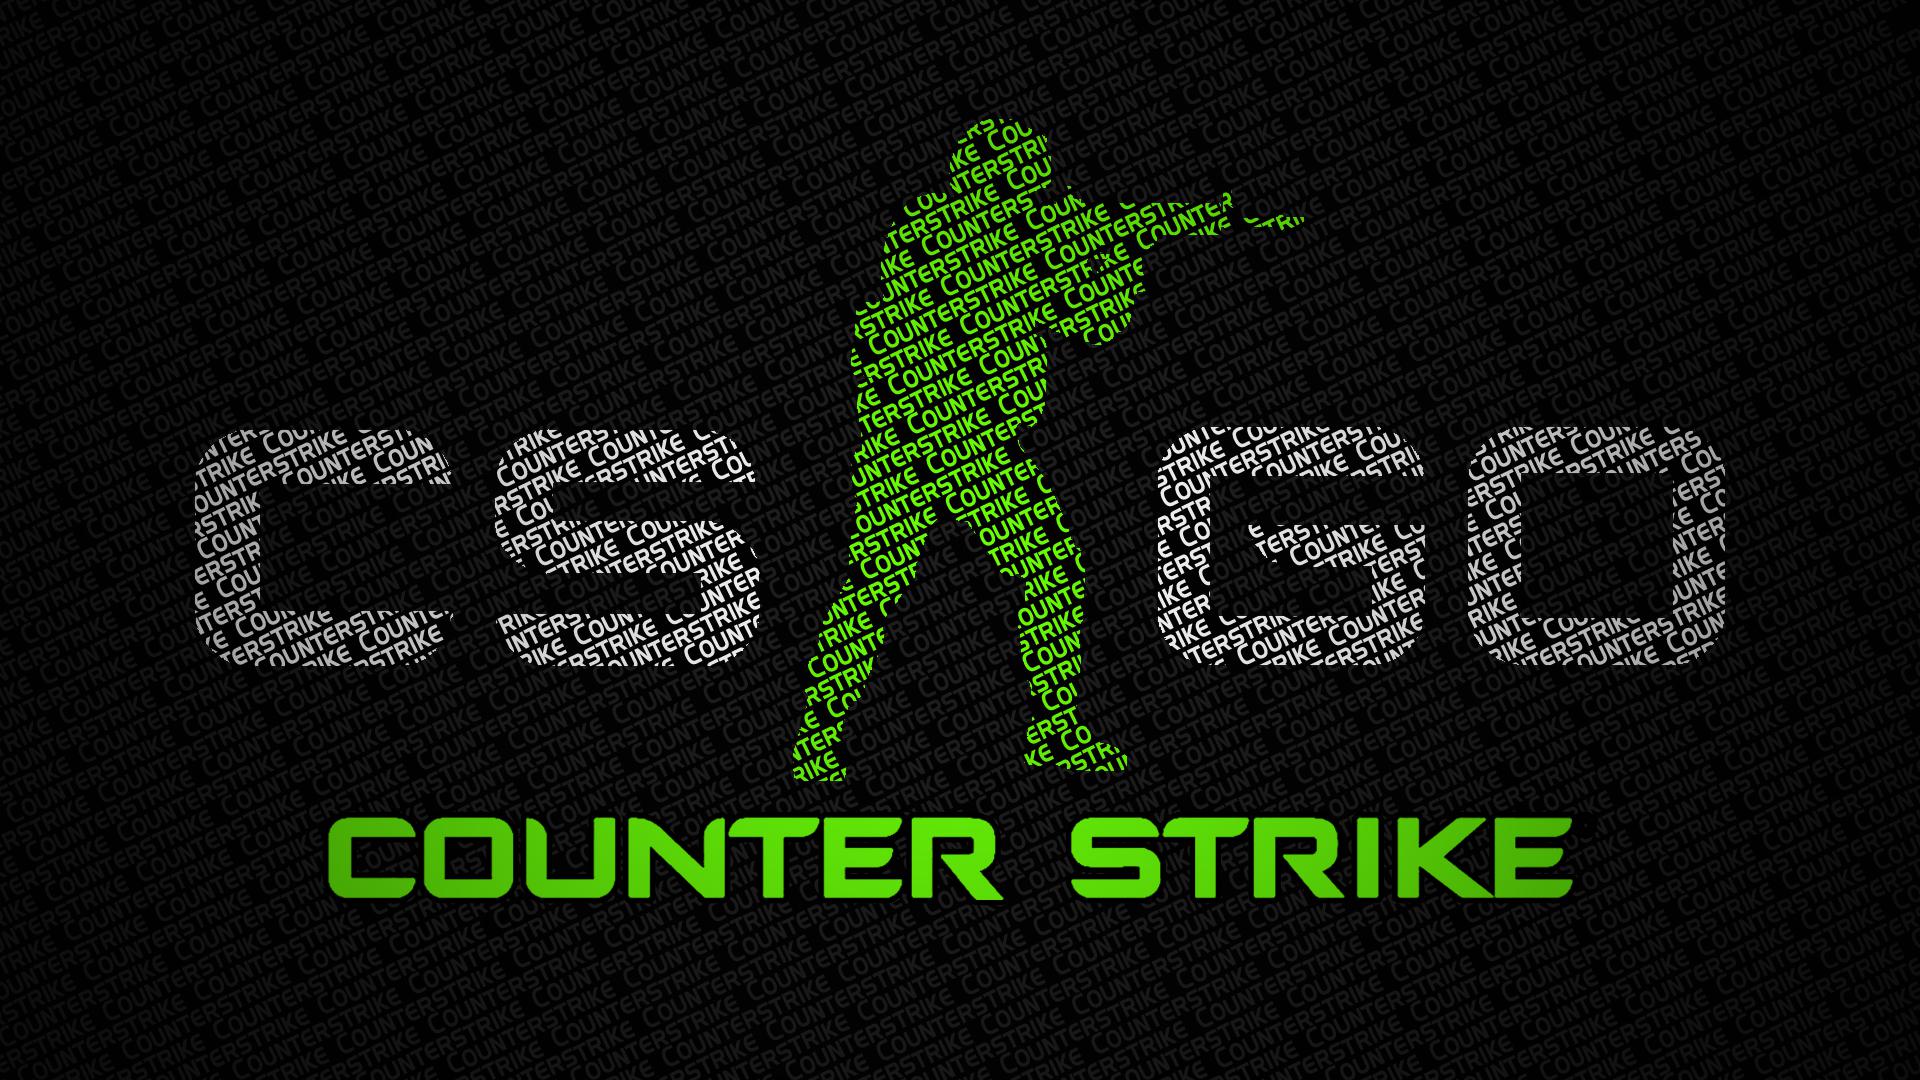 Csgo Typography High Quality And Resolution Wallpaper